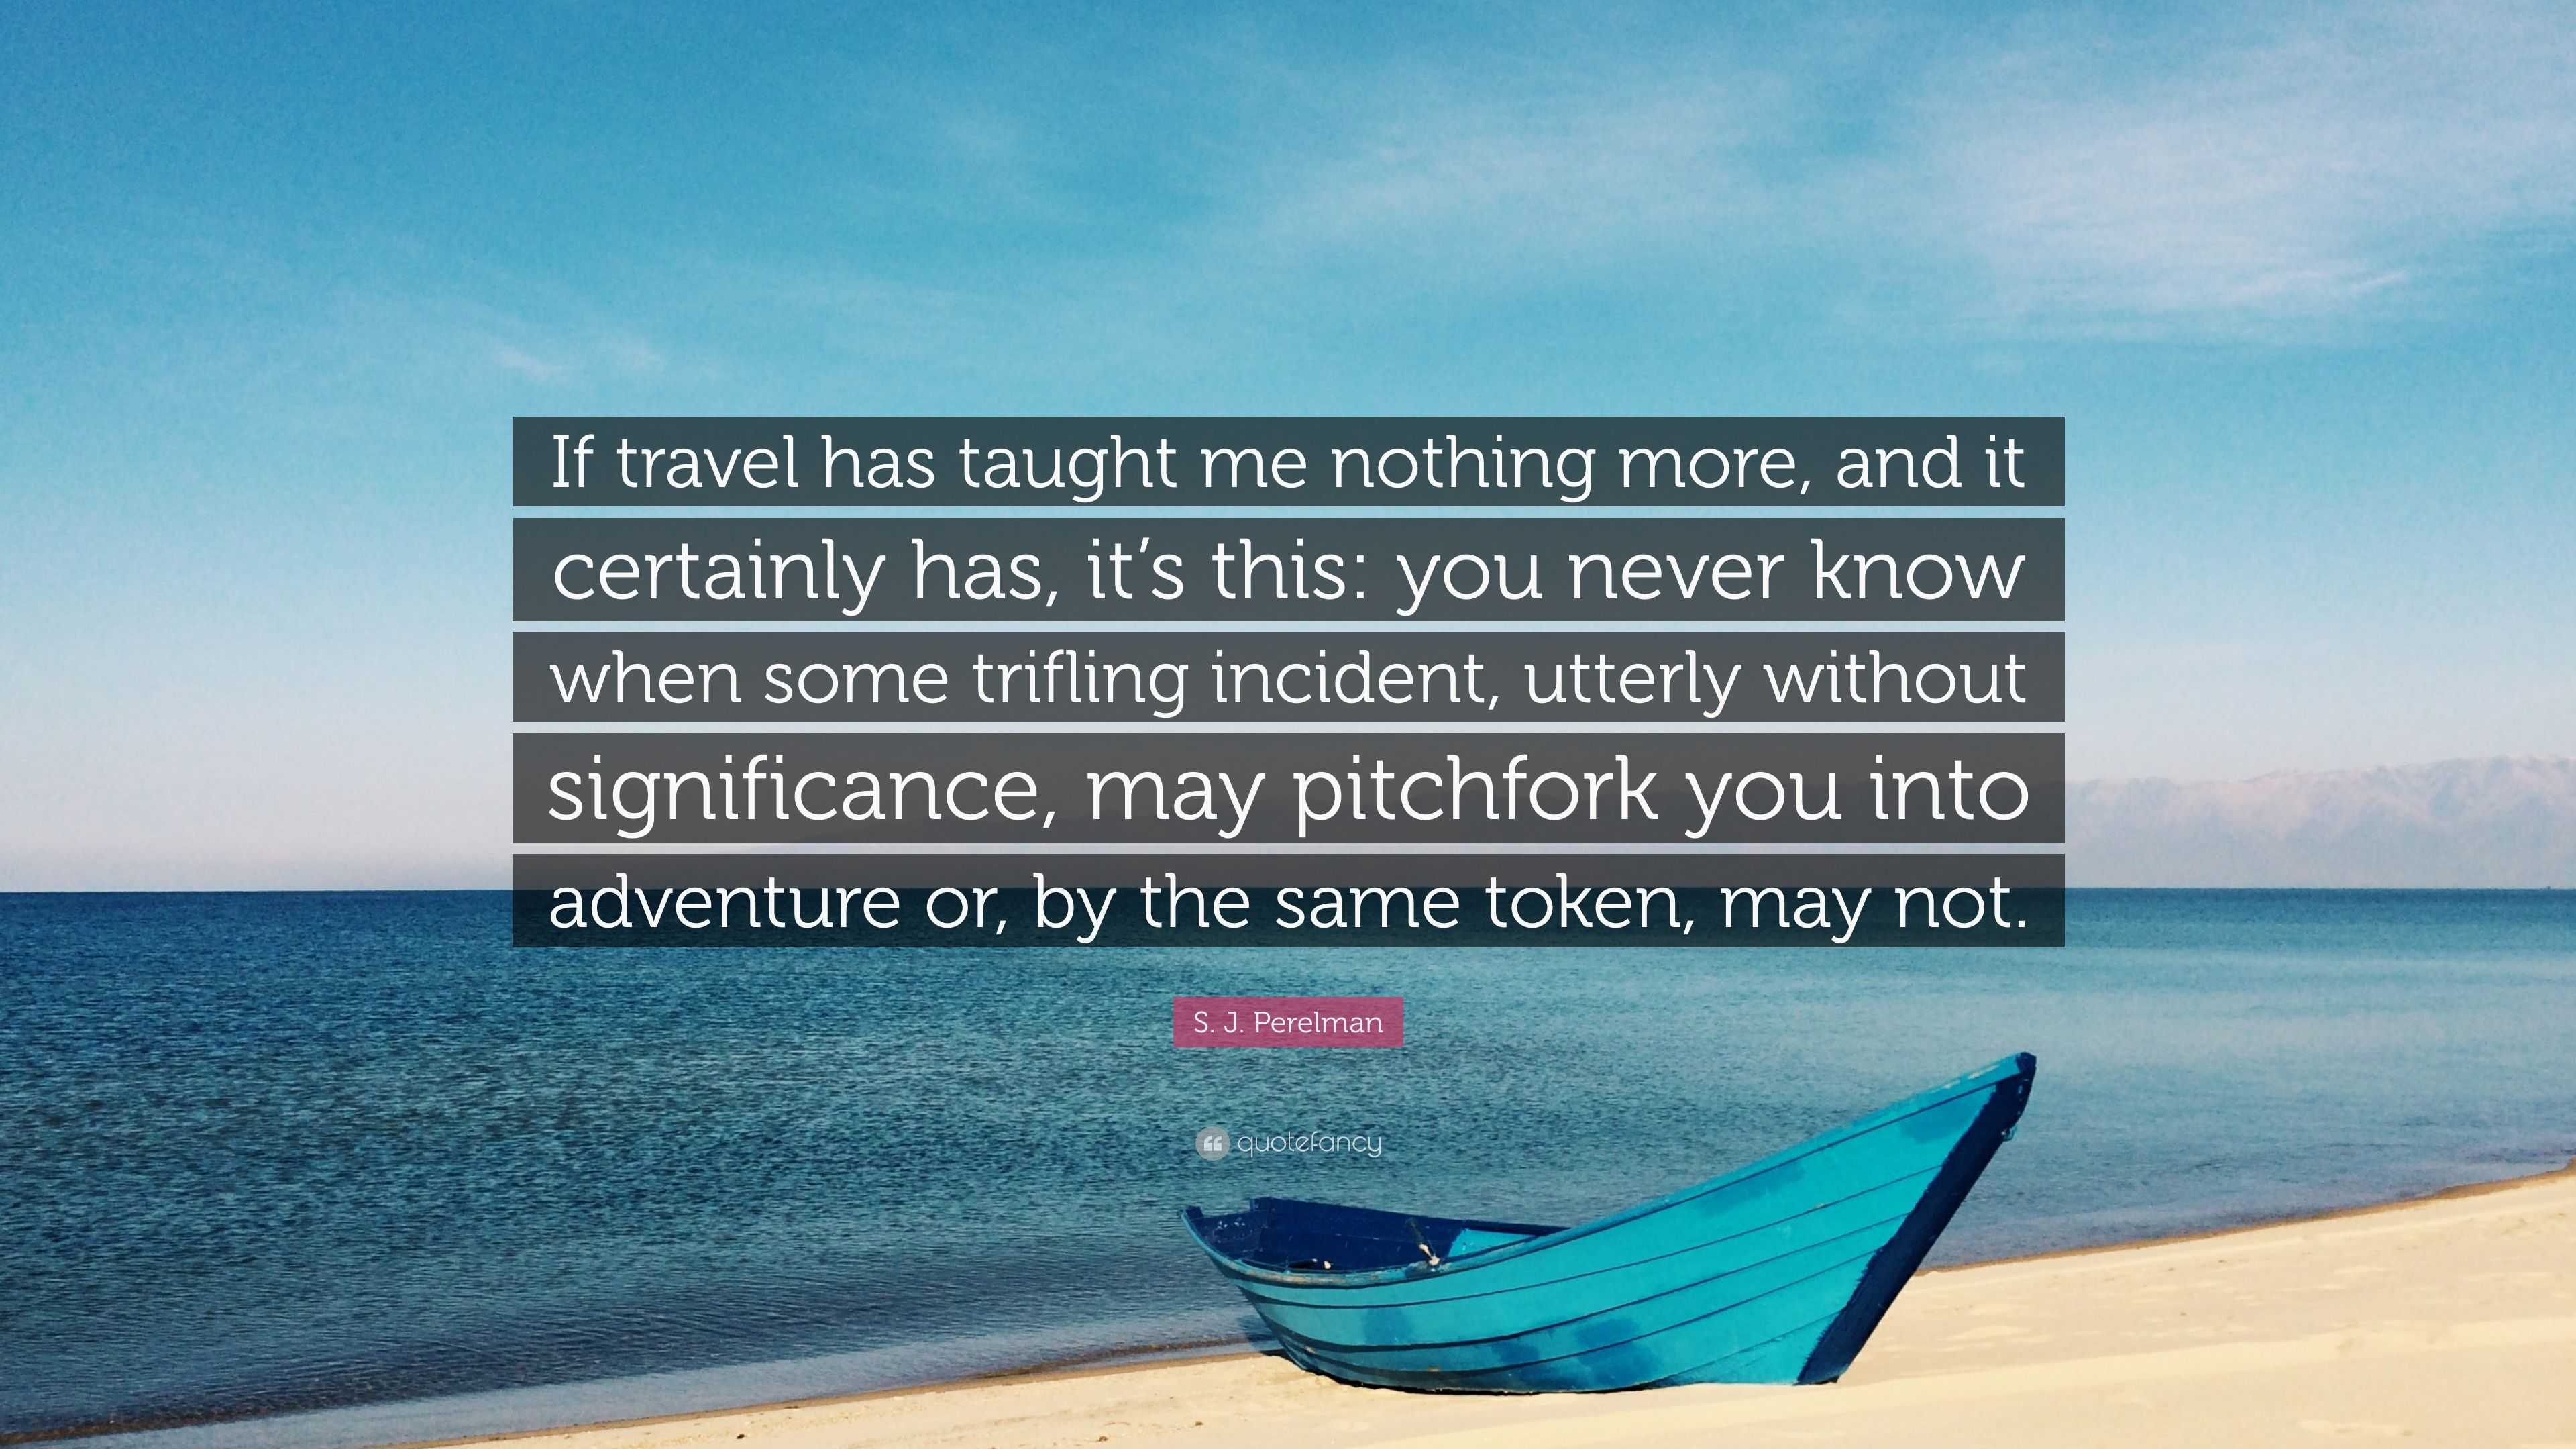 travel has taught me